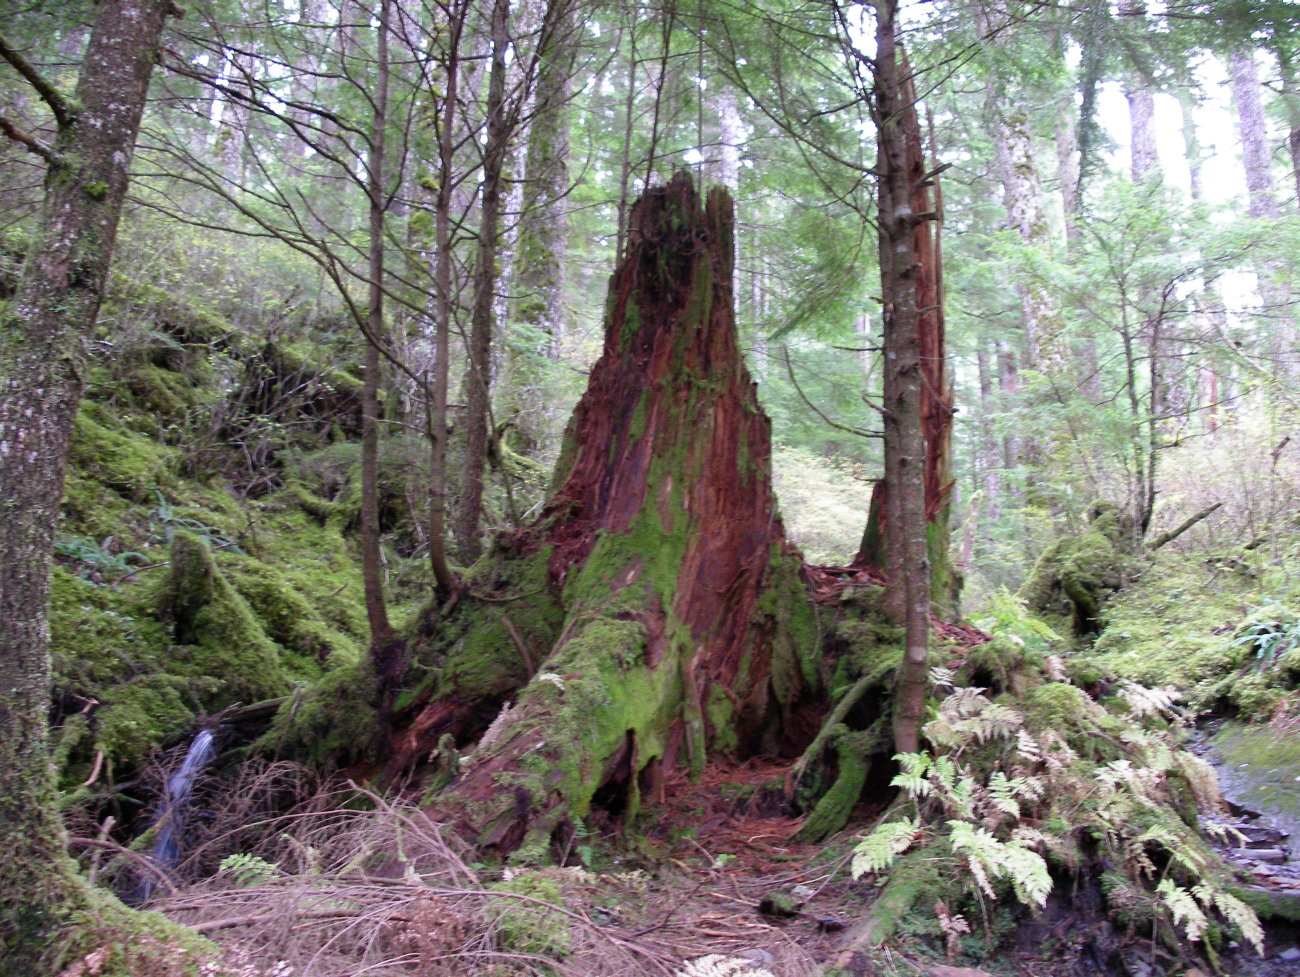 A large red tree stump in the rain forest of Southeast Alaska